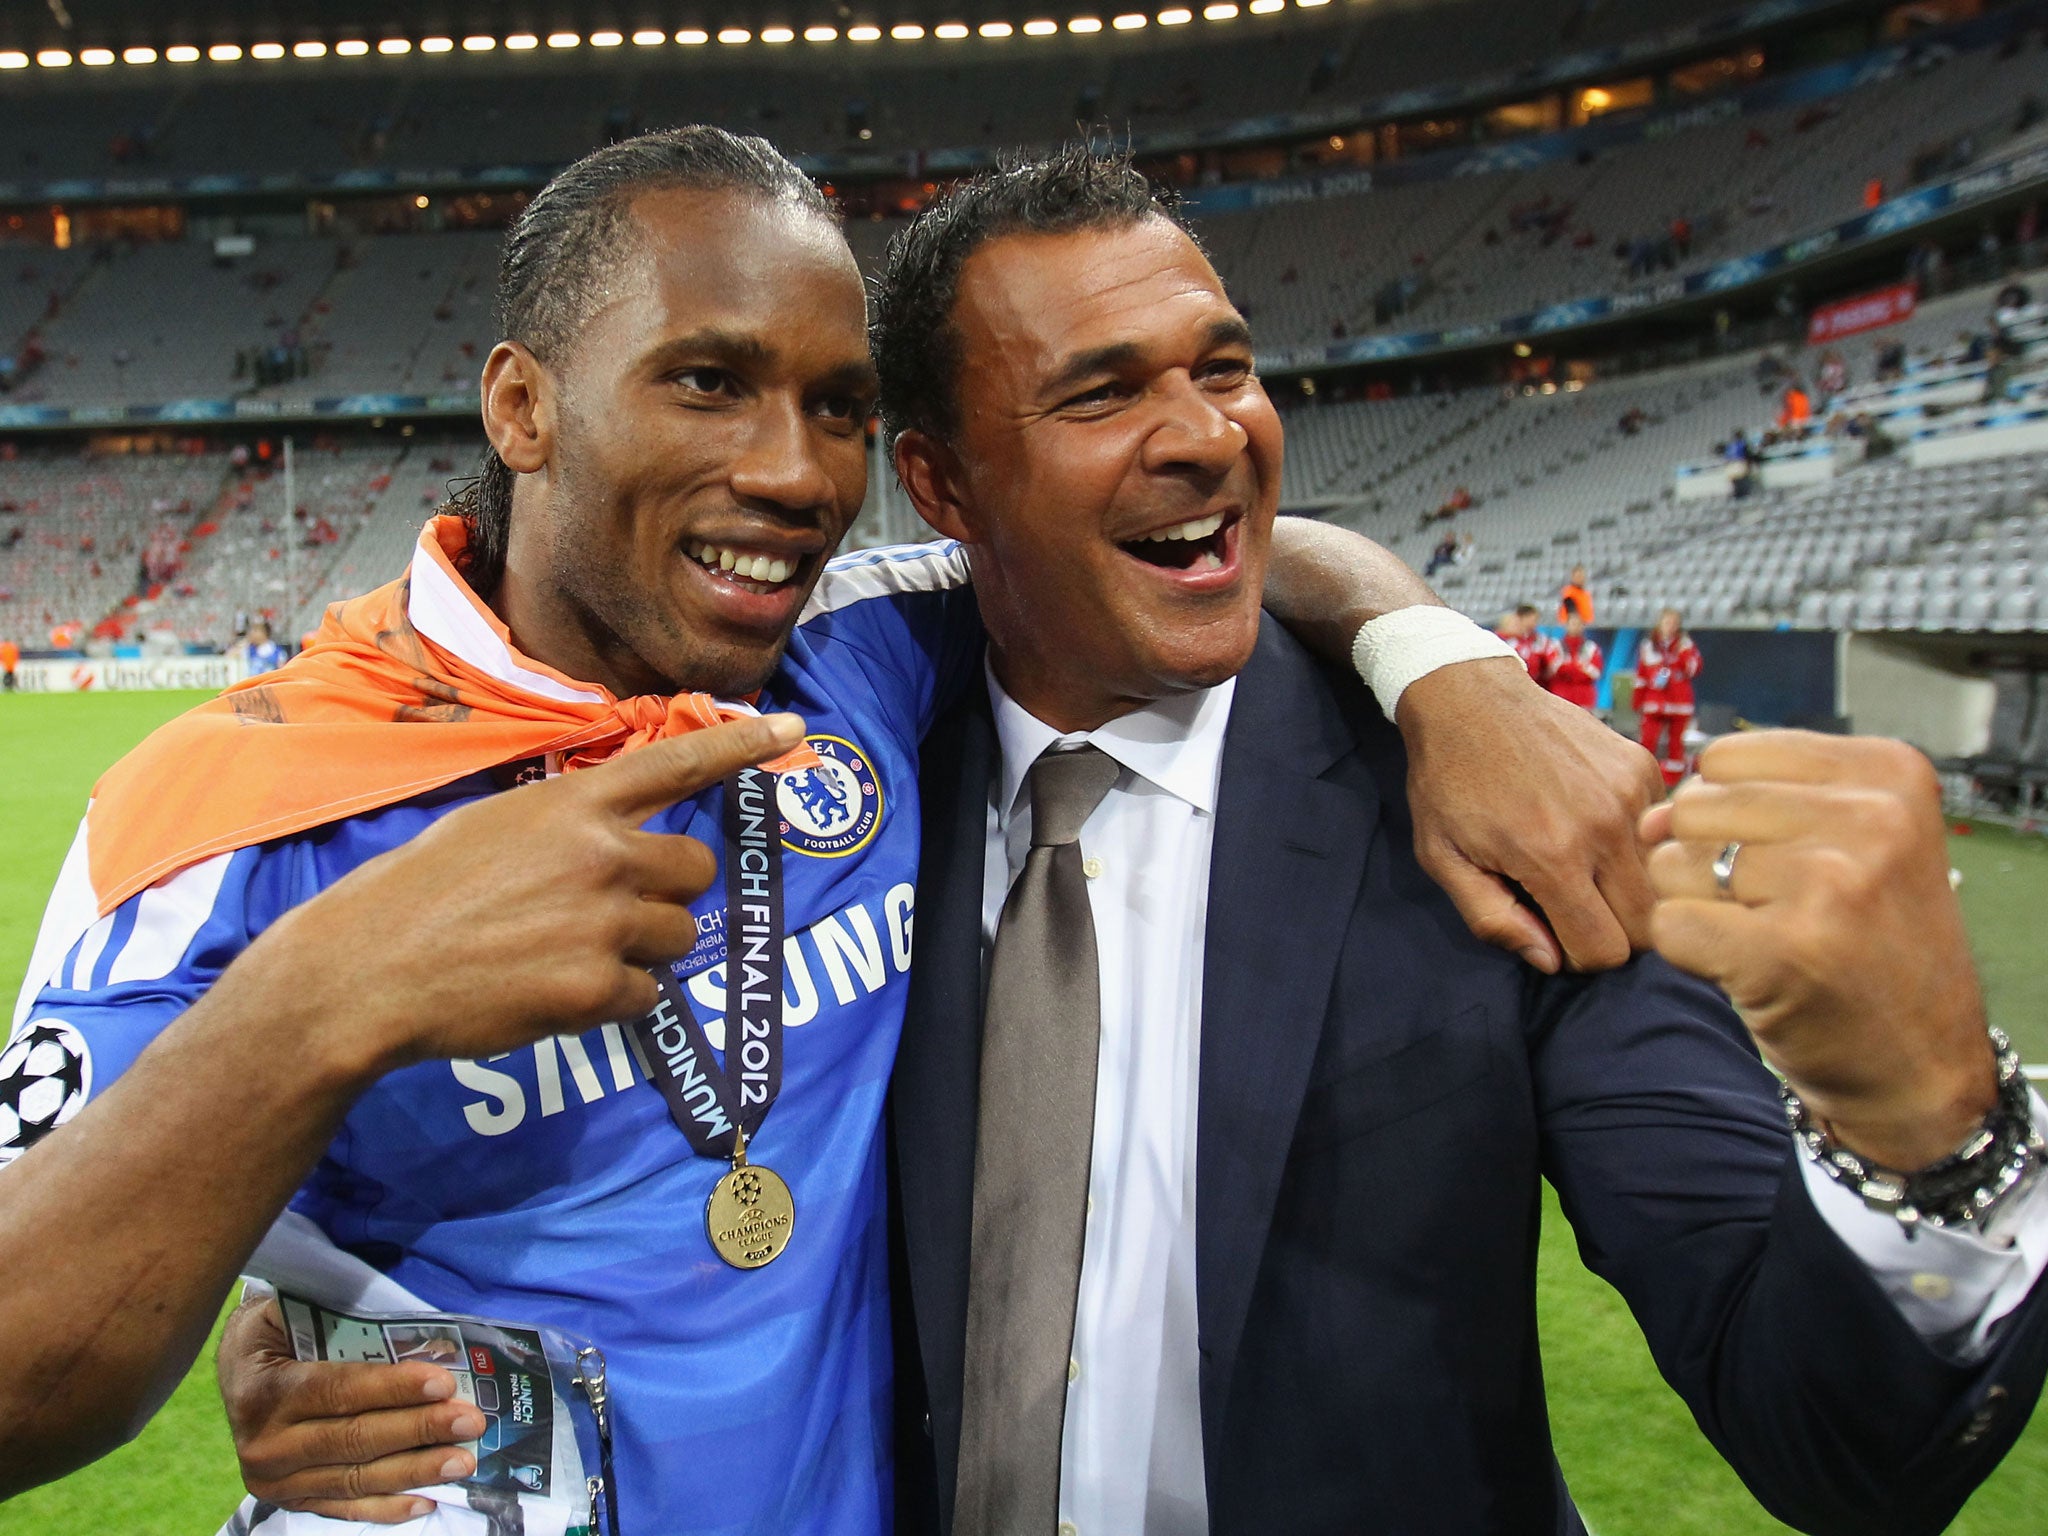 Didier Drogba of Chelsea and former Chelsea manager Ruud Gullit celebrate after their victory in the UEFA Champions League Final